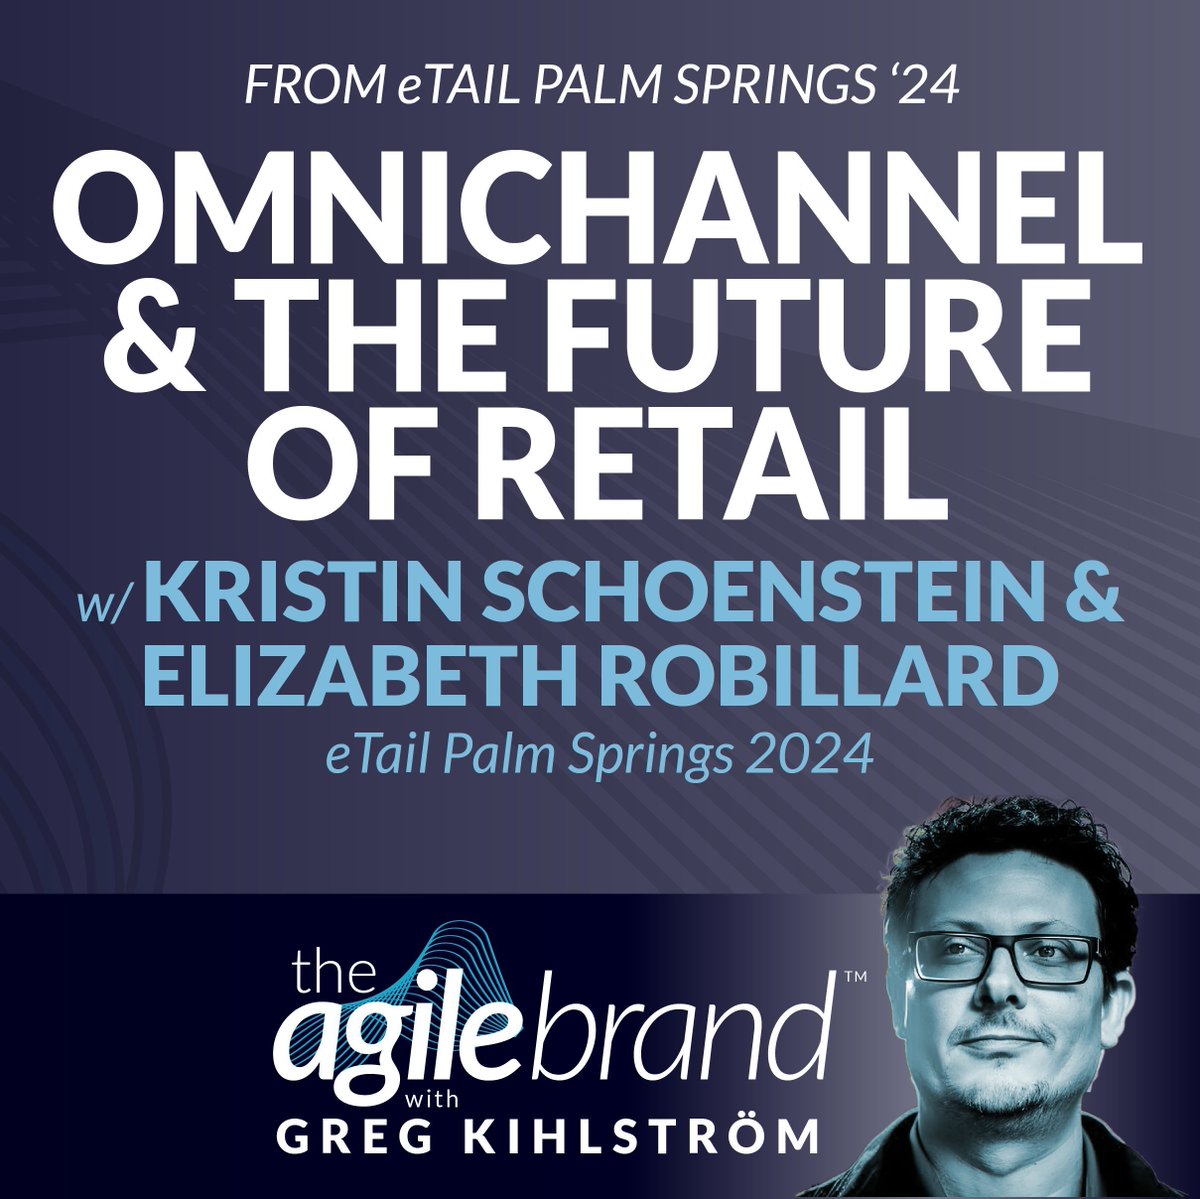 🔊  EPISODE 483: buff.ly/3SQbojD @gregkihlstrom talks with Kristin Schoenstein and Elizabeth Robillard from @eTailNews Palm Springs about #retail trends including what exactly #omnichannel means, the impact of #AI, and more.  🎧 

#customerdata #1pdata #personalization